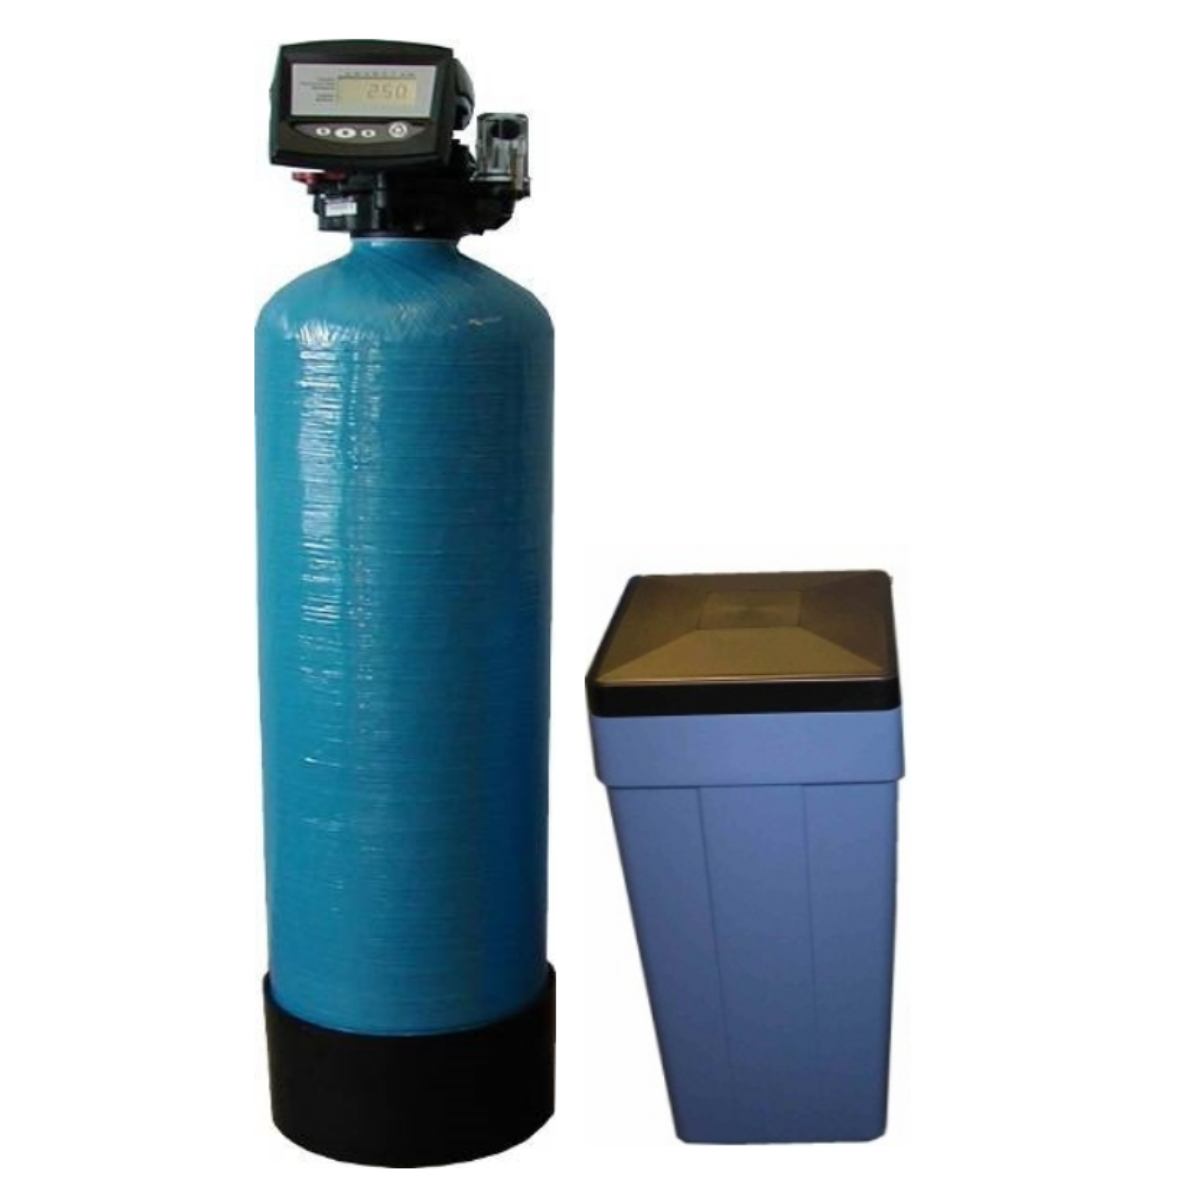 Simplex Autotrol 255 Time Based Controlled Commercial Water Softener 10" x 35", 30 Litres